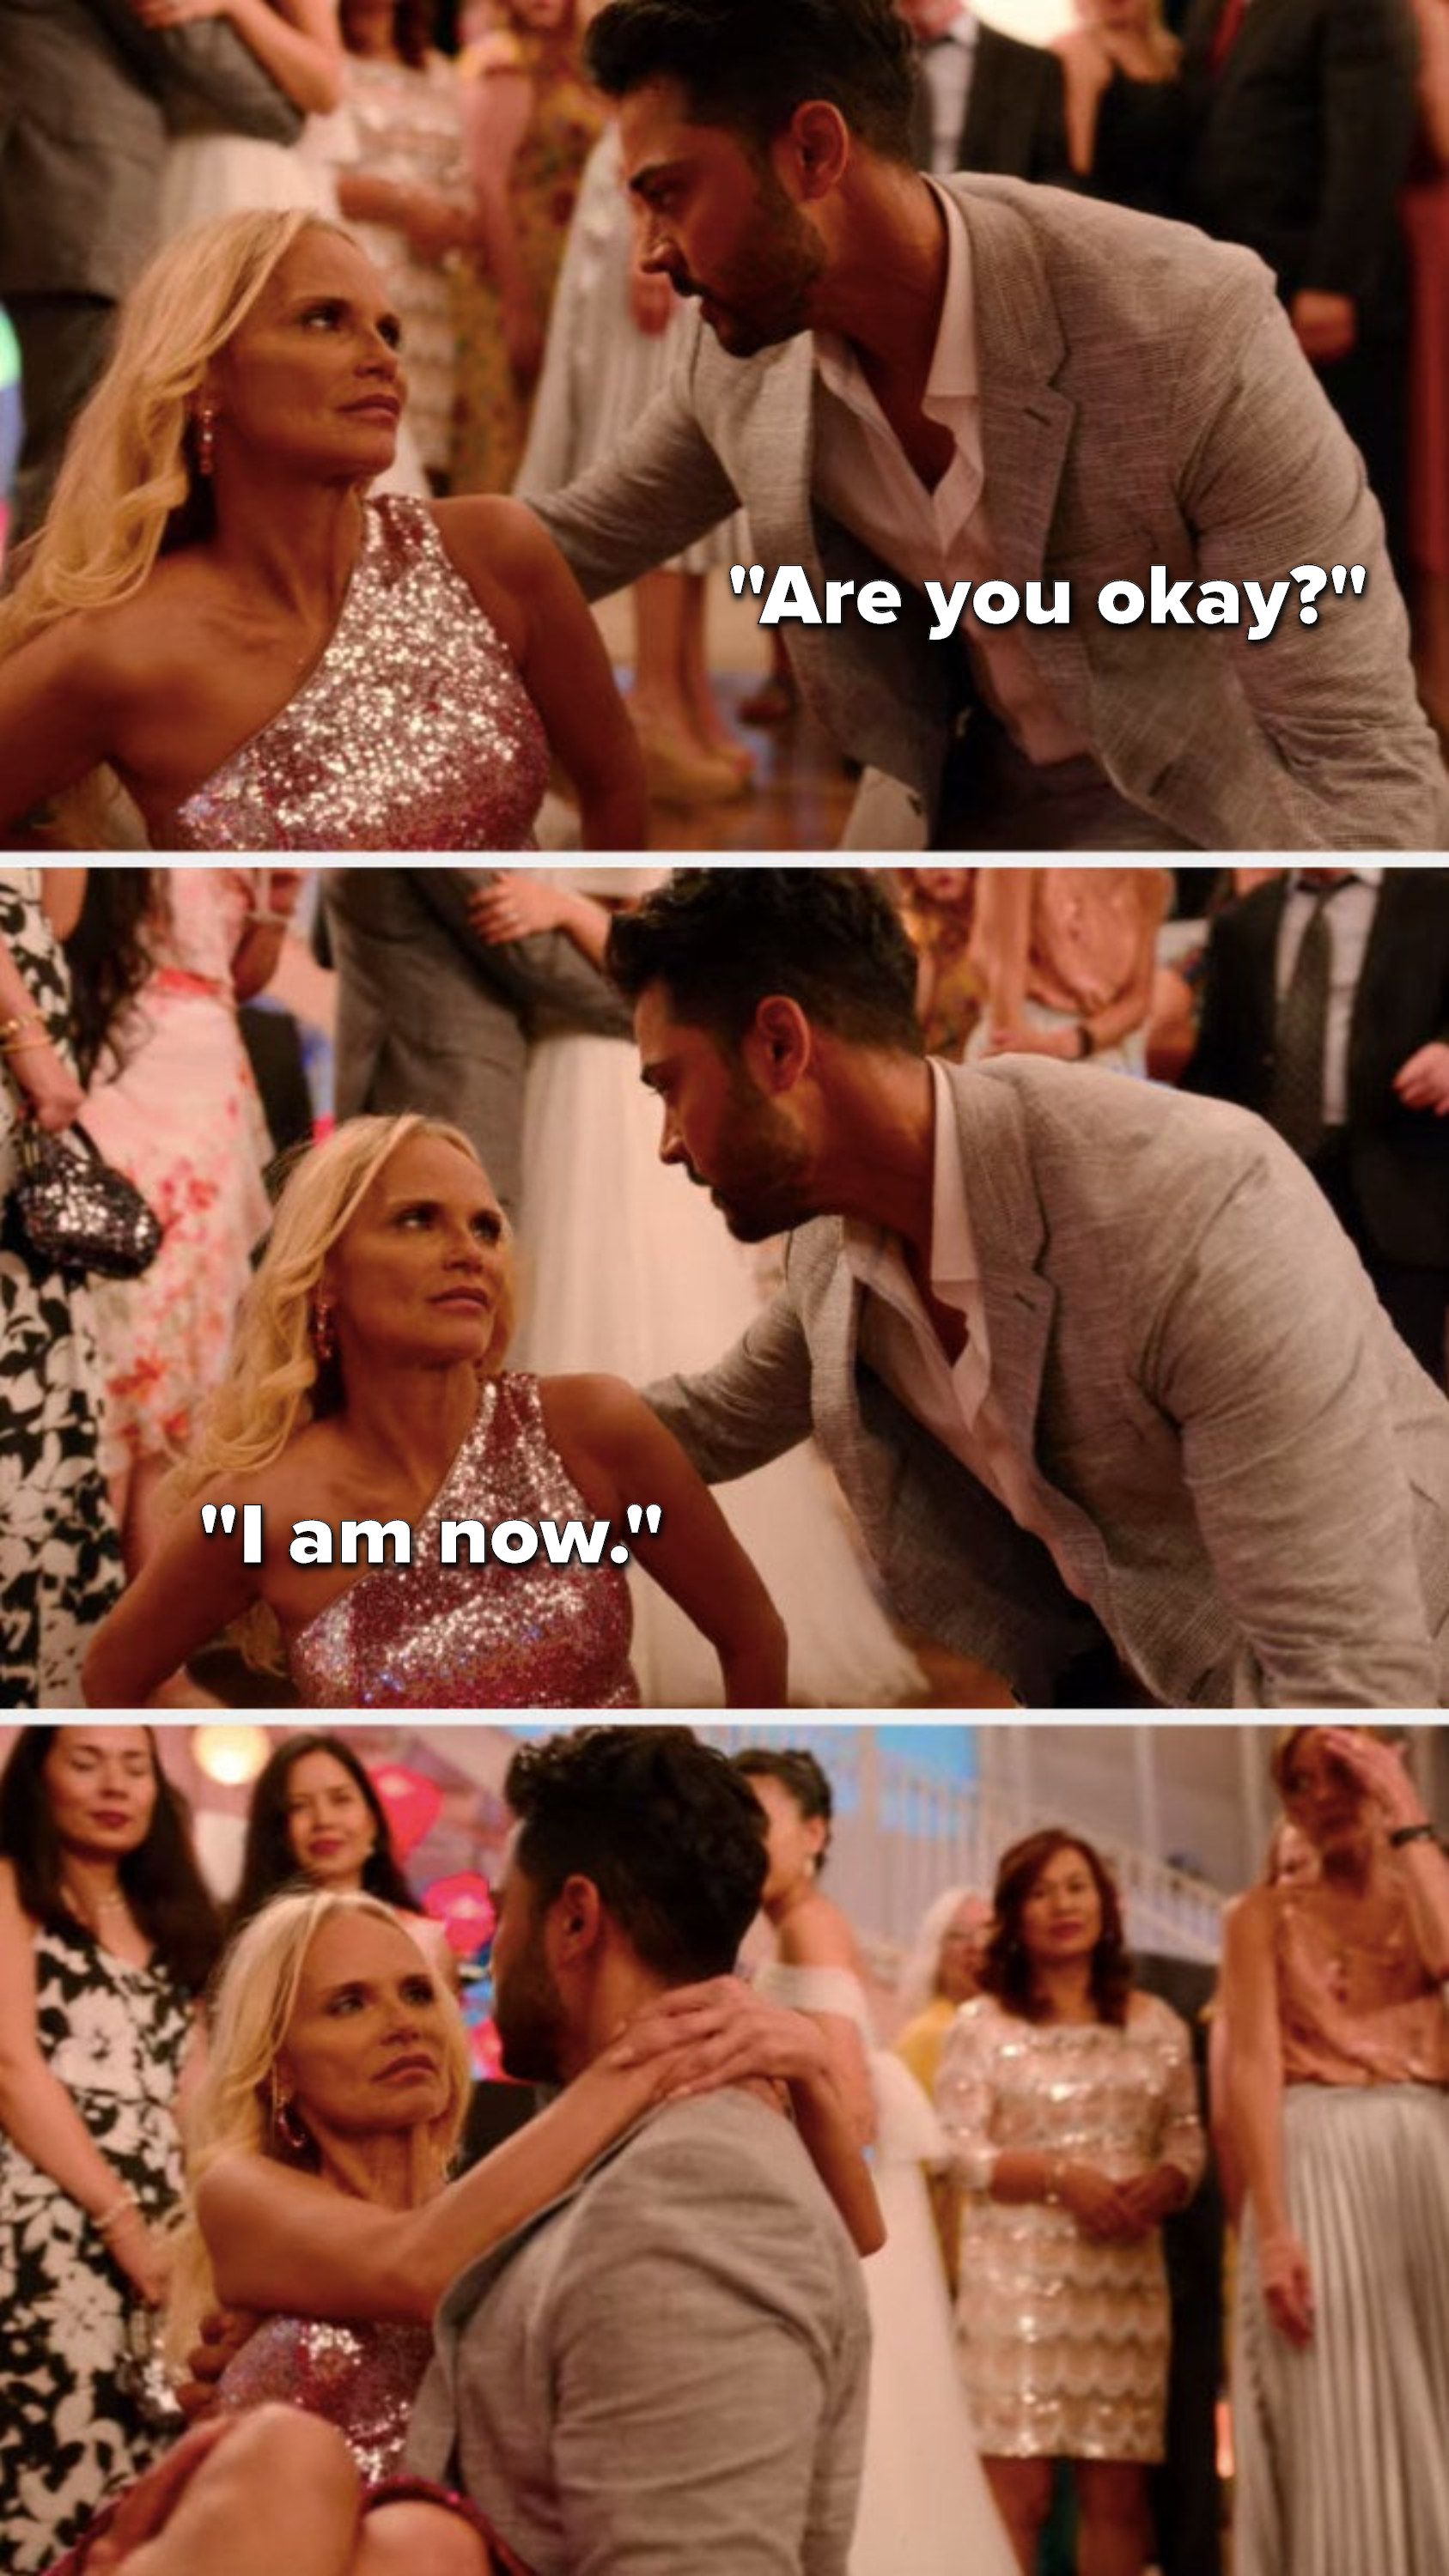 Faarooq asks, "Are you okay," Kristin Chenoweth says, "I am now," and he lifts her up